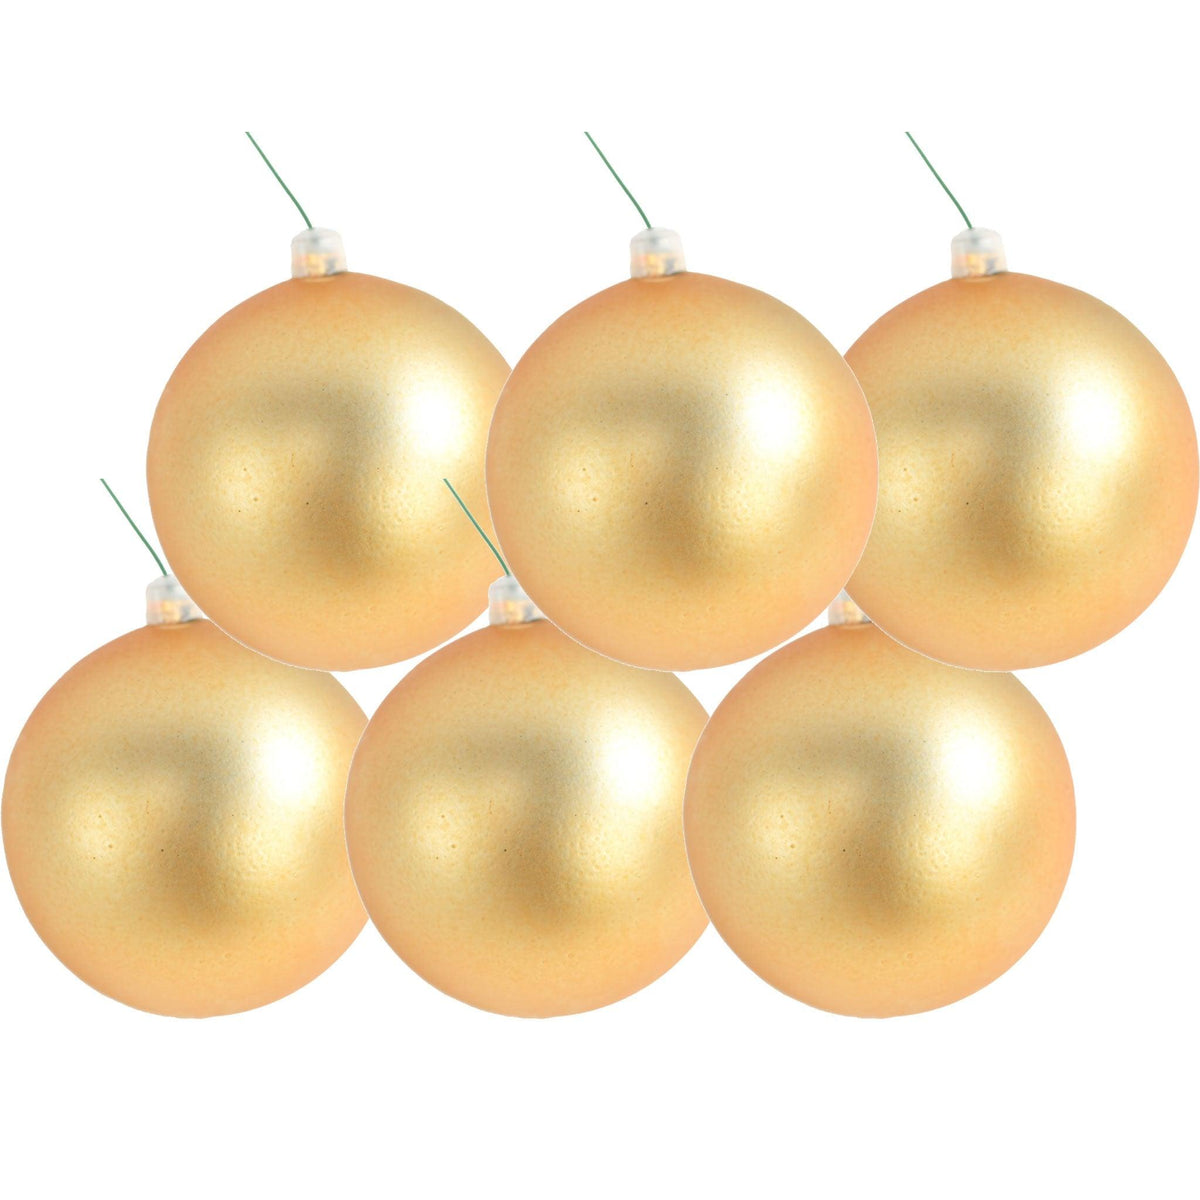 Lee Display offers brand new Shiny Matte Gold Plastic Ball Ornaments at wholesale prices for affordable Christmas Tree Hanging and Holiday Decorating on sale at leedisplay.com